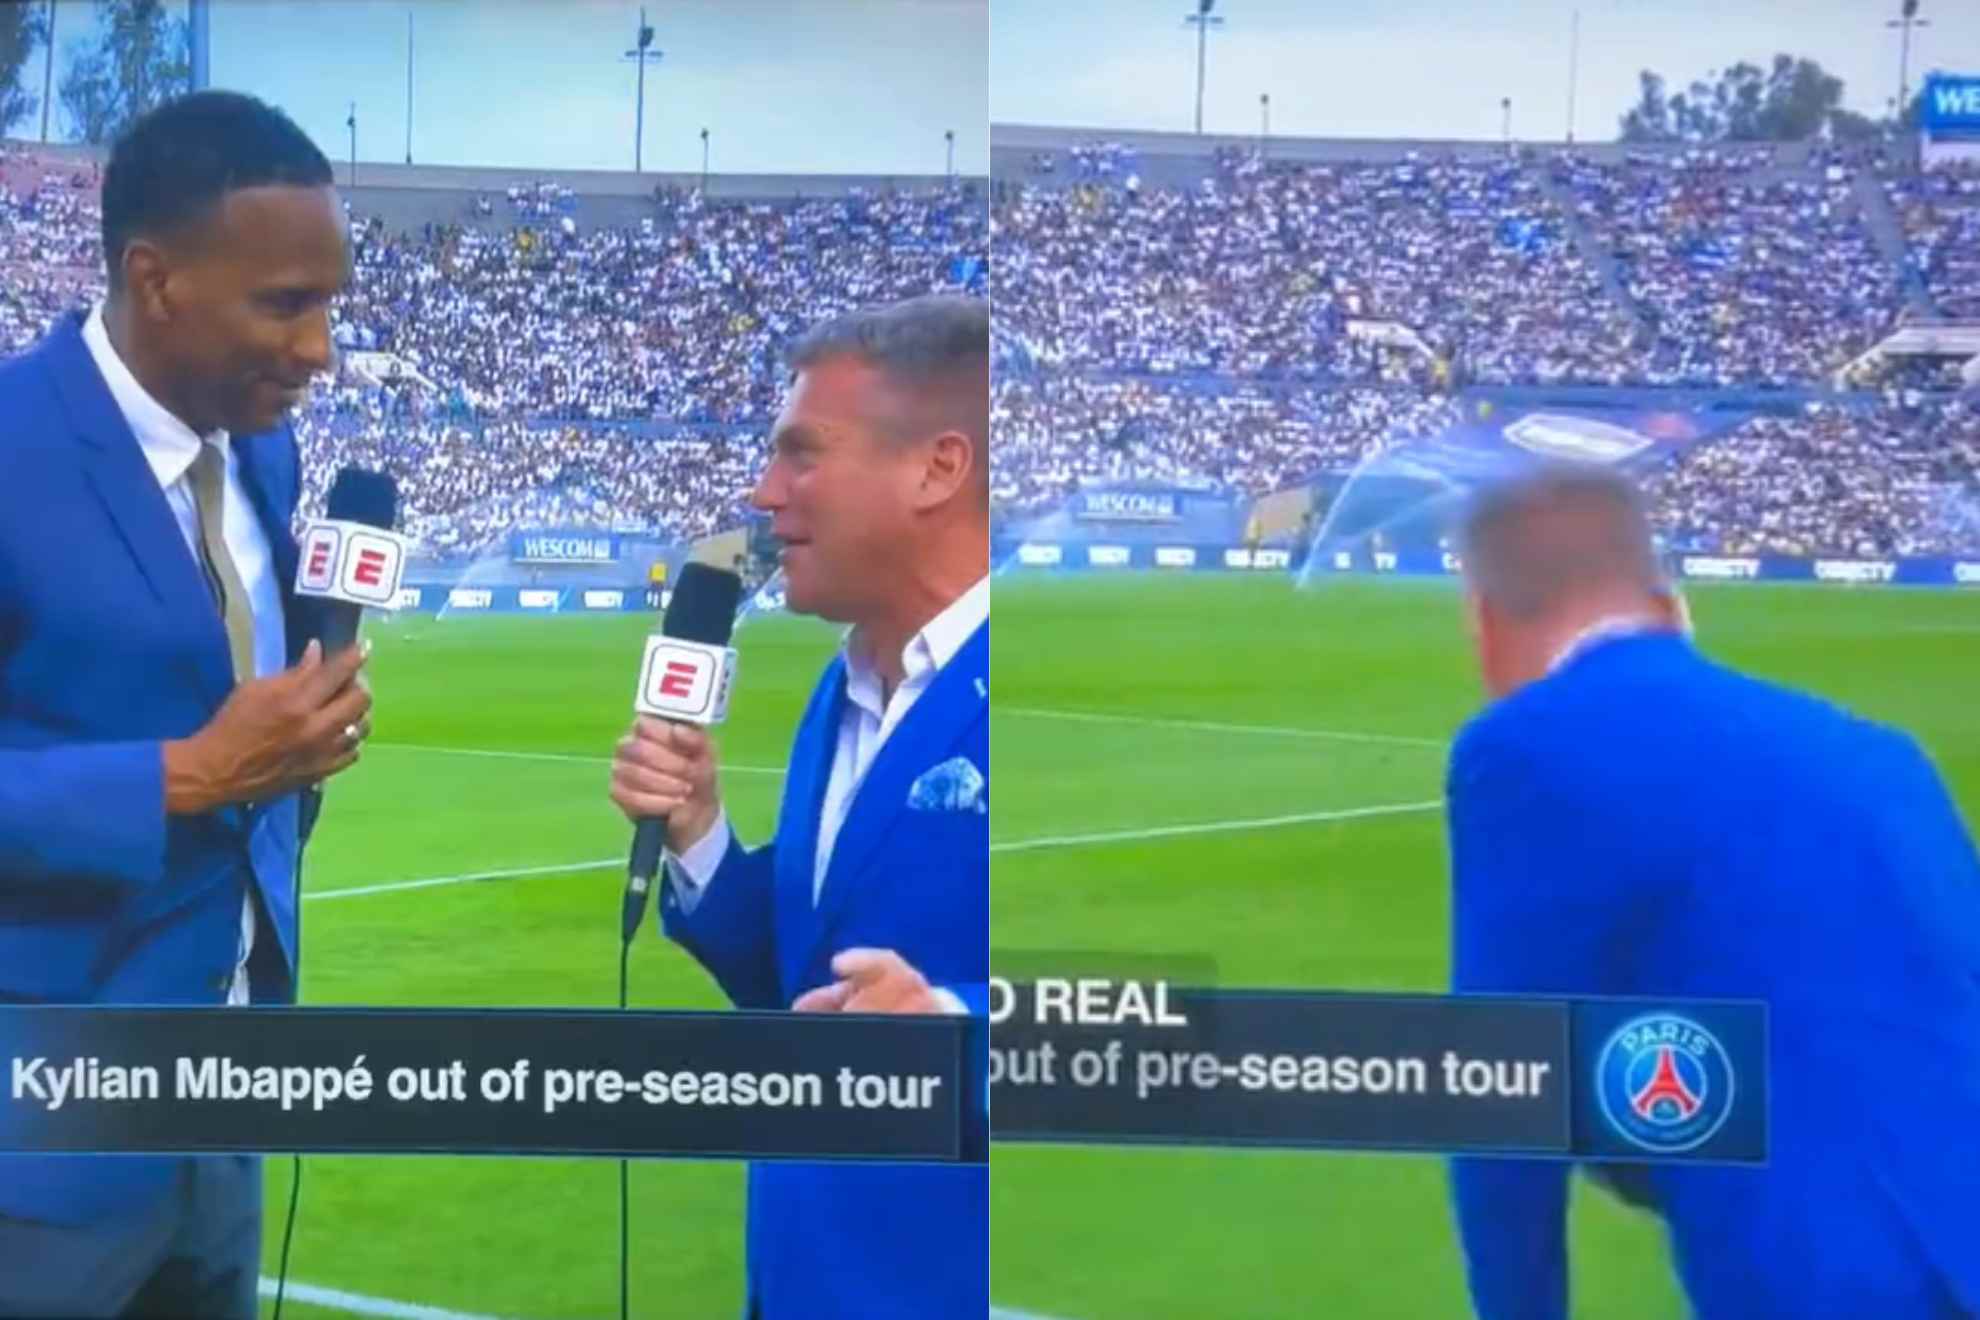 Shaka Hislop and Dan Thomas, were reporting from the Rose Bowl, before the former collapsed on live TV.